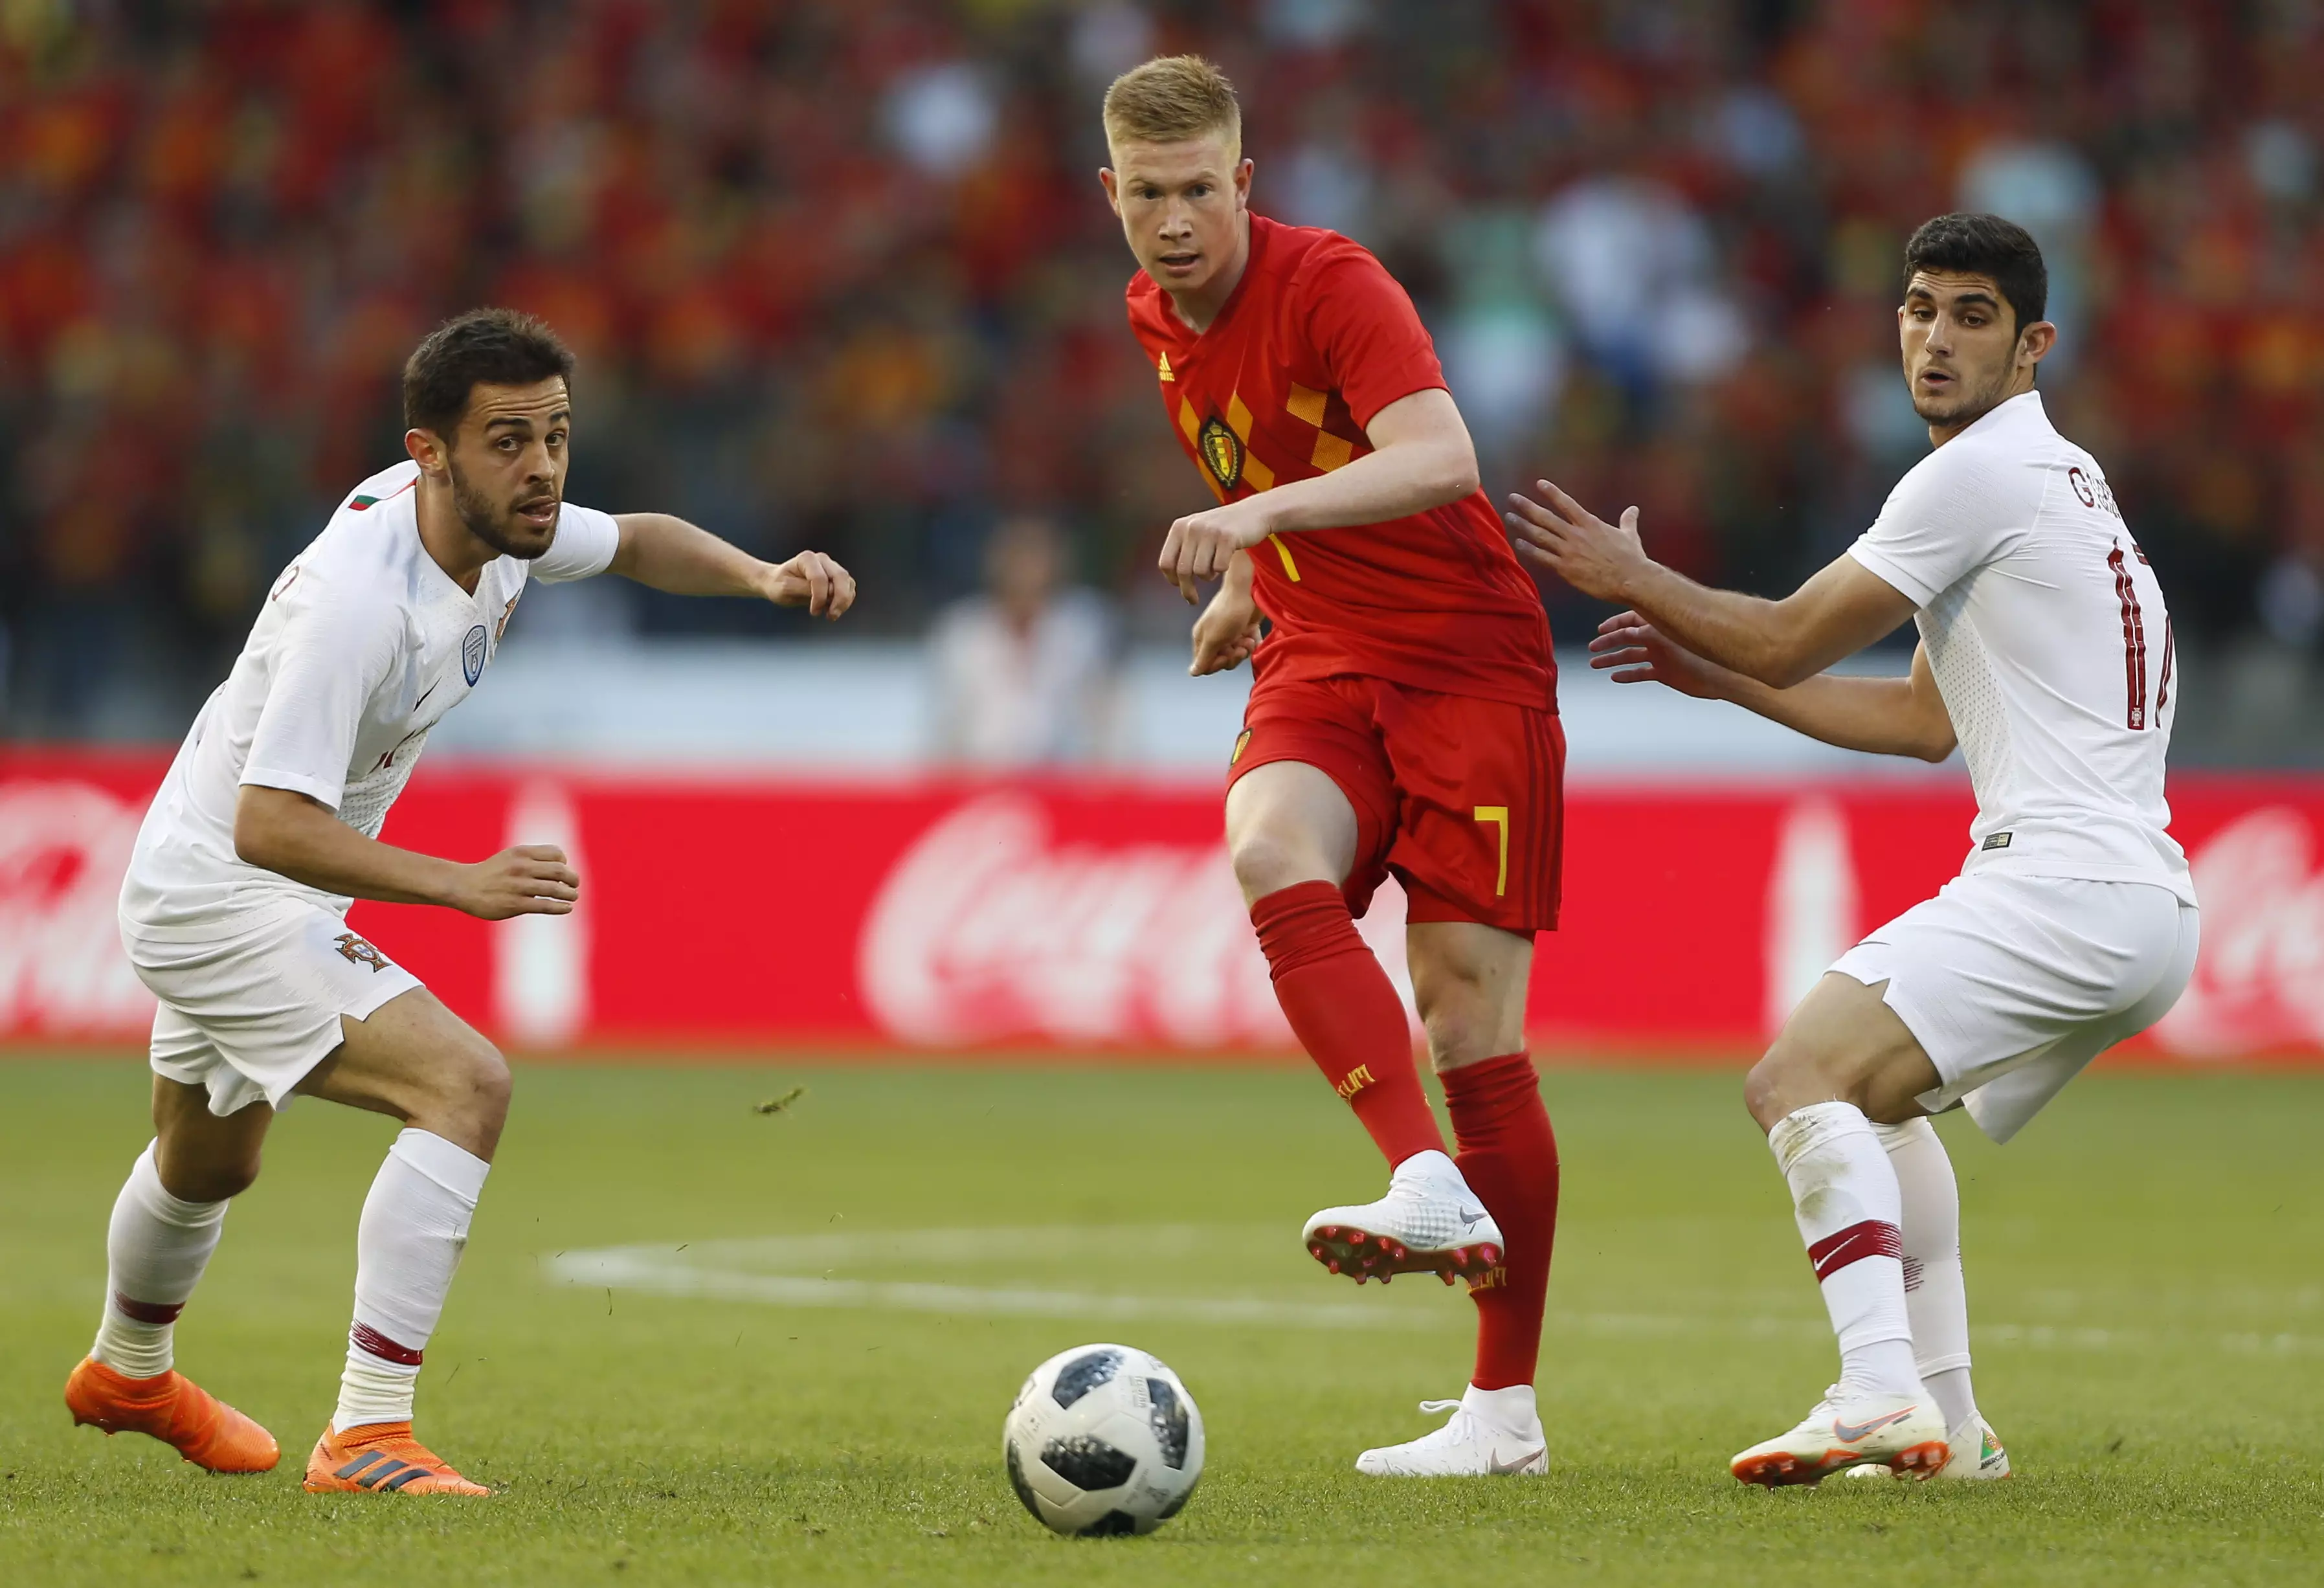 De Bruyne passes the ball in a friendly vs. Portugal. Image: PA